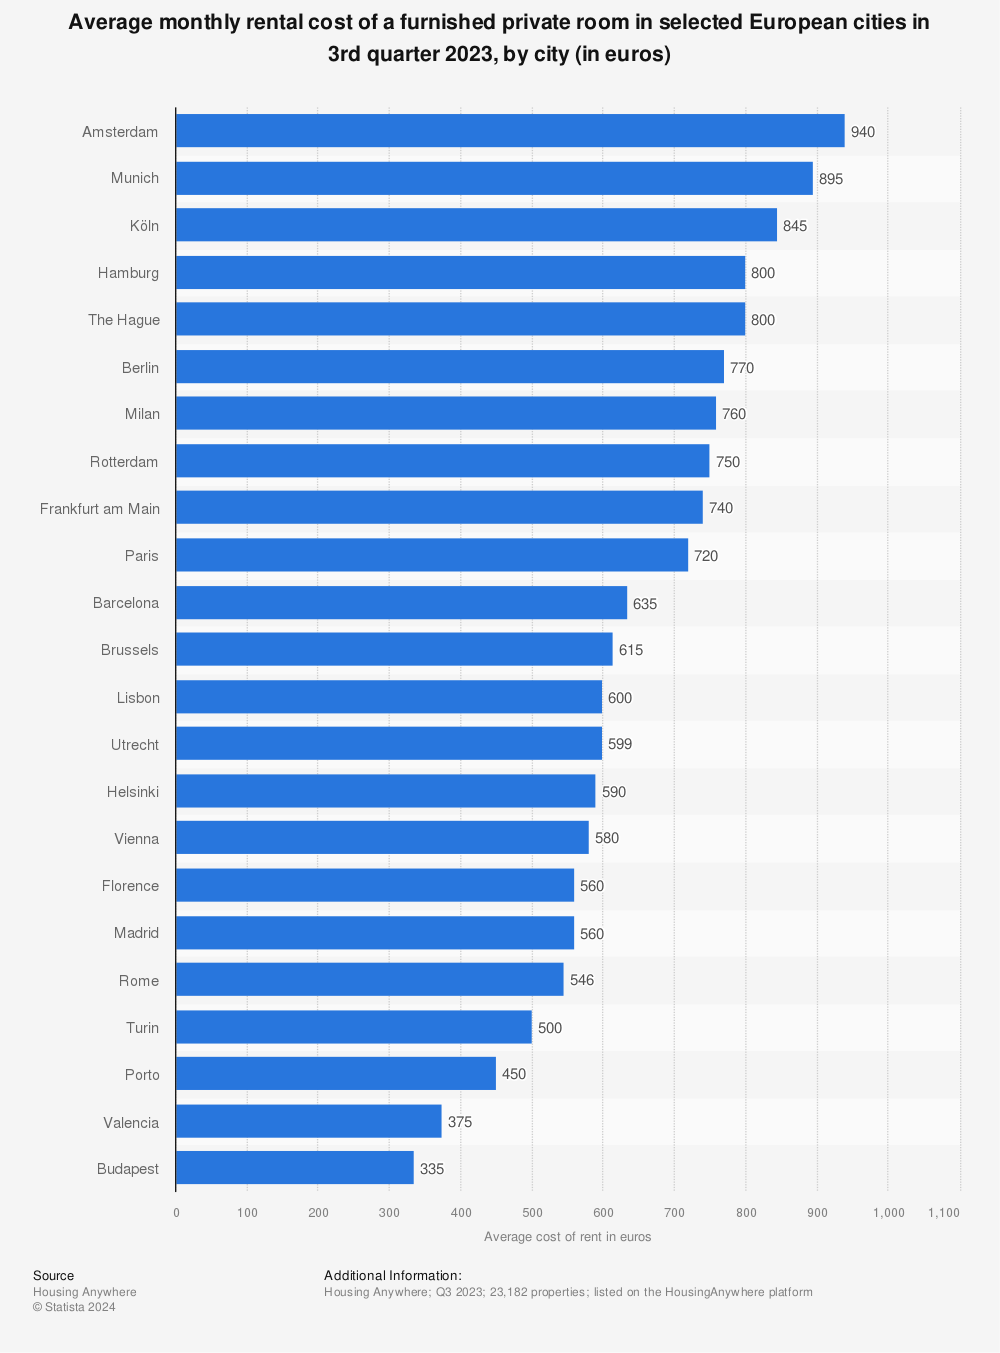 Statistic: Average monthly rental cost of a furnished private room in selected European cities as of 3rd quarter 2021 and 3rd quarter 2022, by city (in euros) | Statista